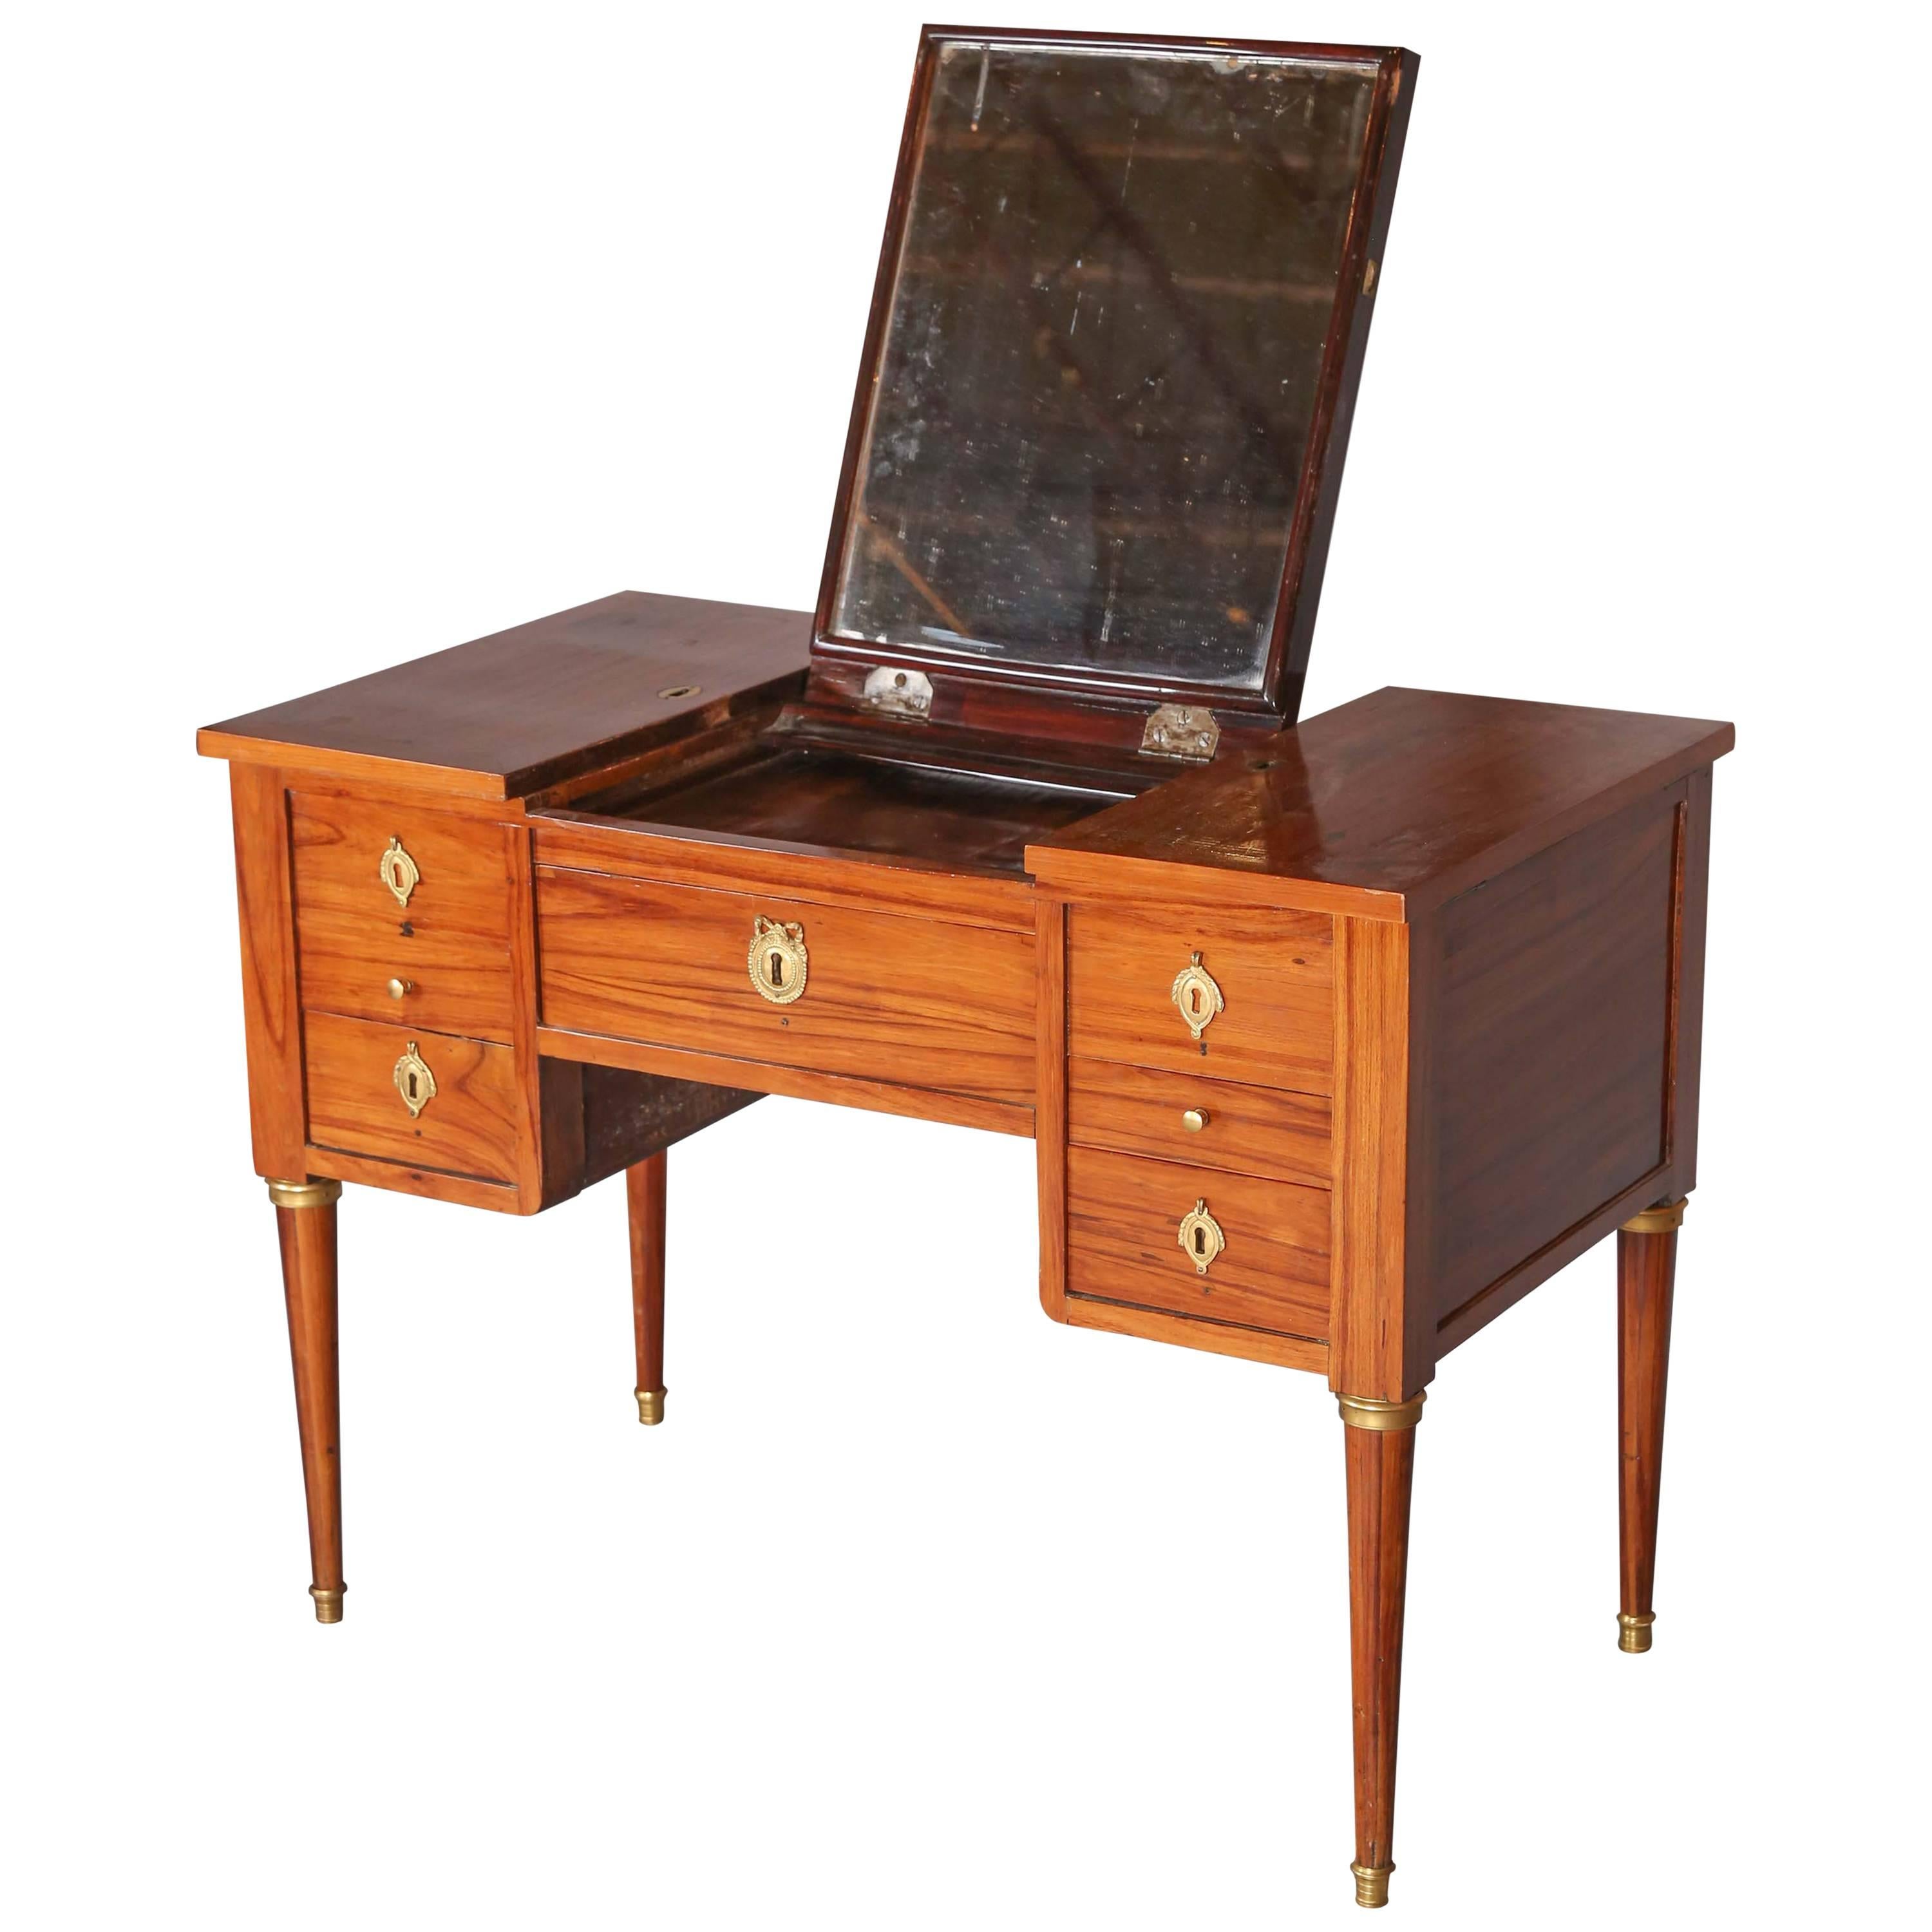 Kingwood Louis XVI Dressing Table with Desk Drawer